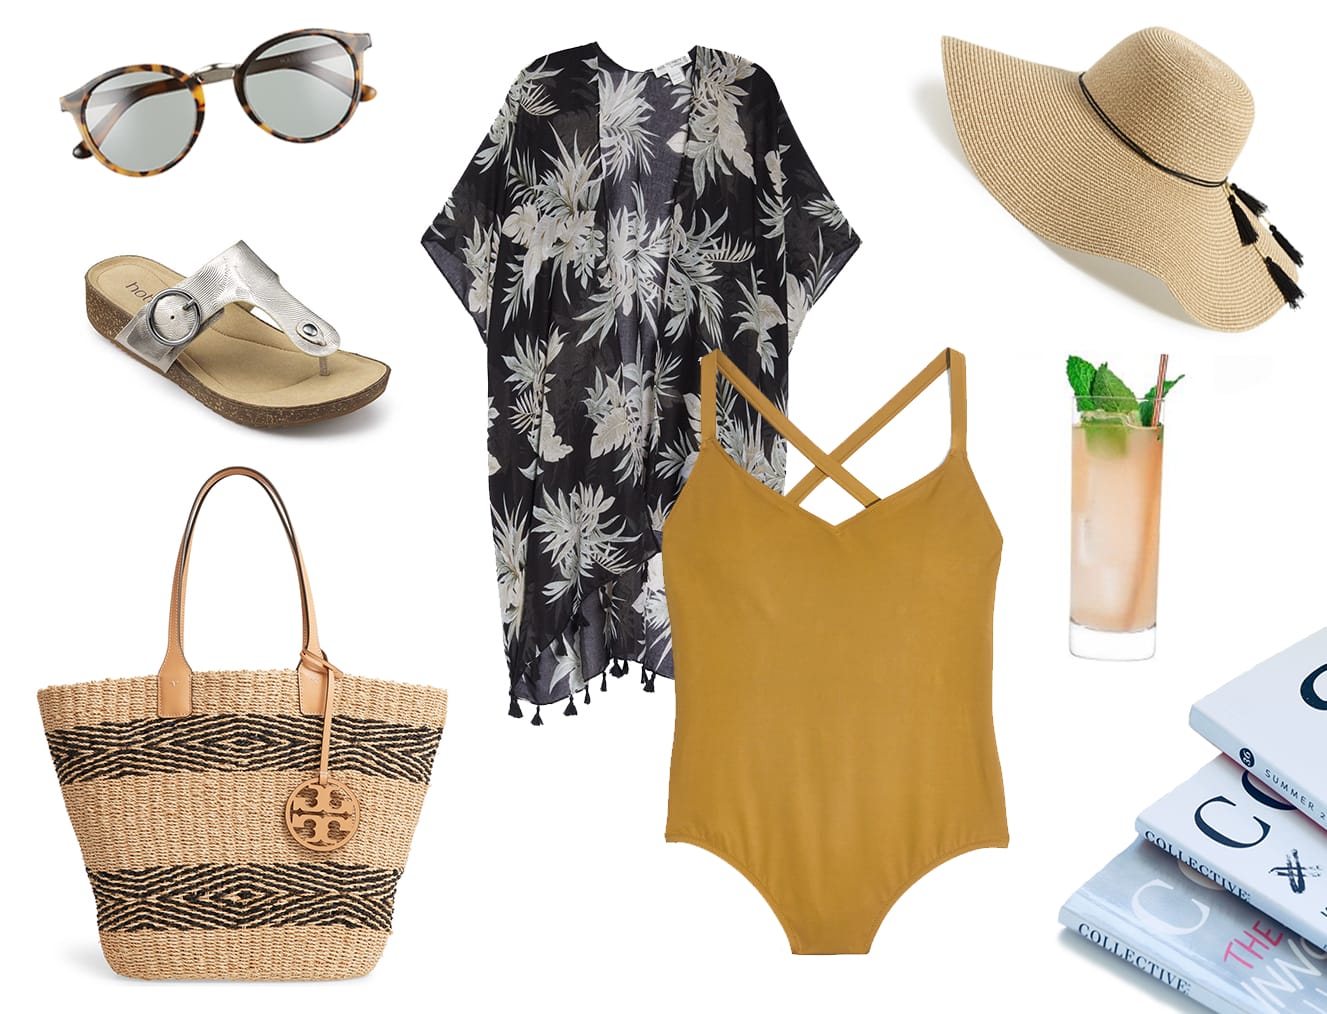 Get Resort Ready, top resort wear looks for 2019 What To Wear on Vacation